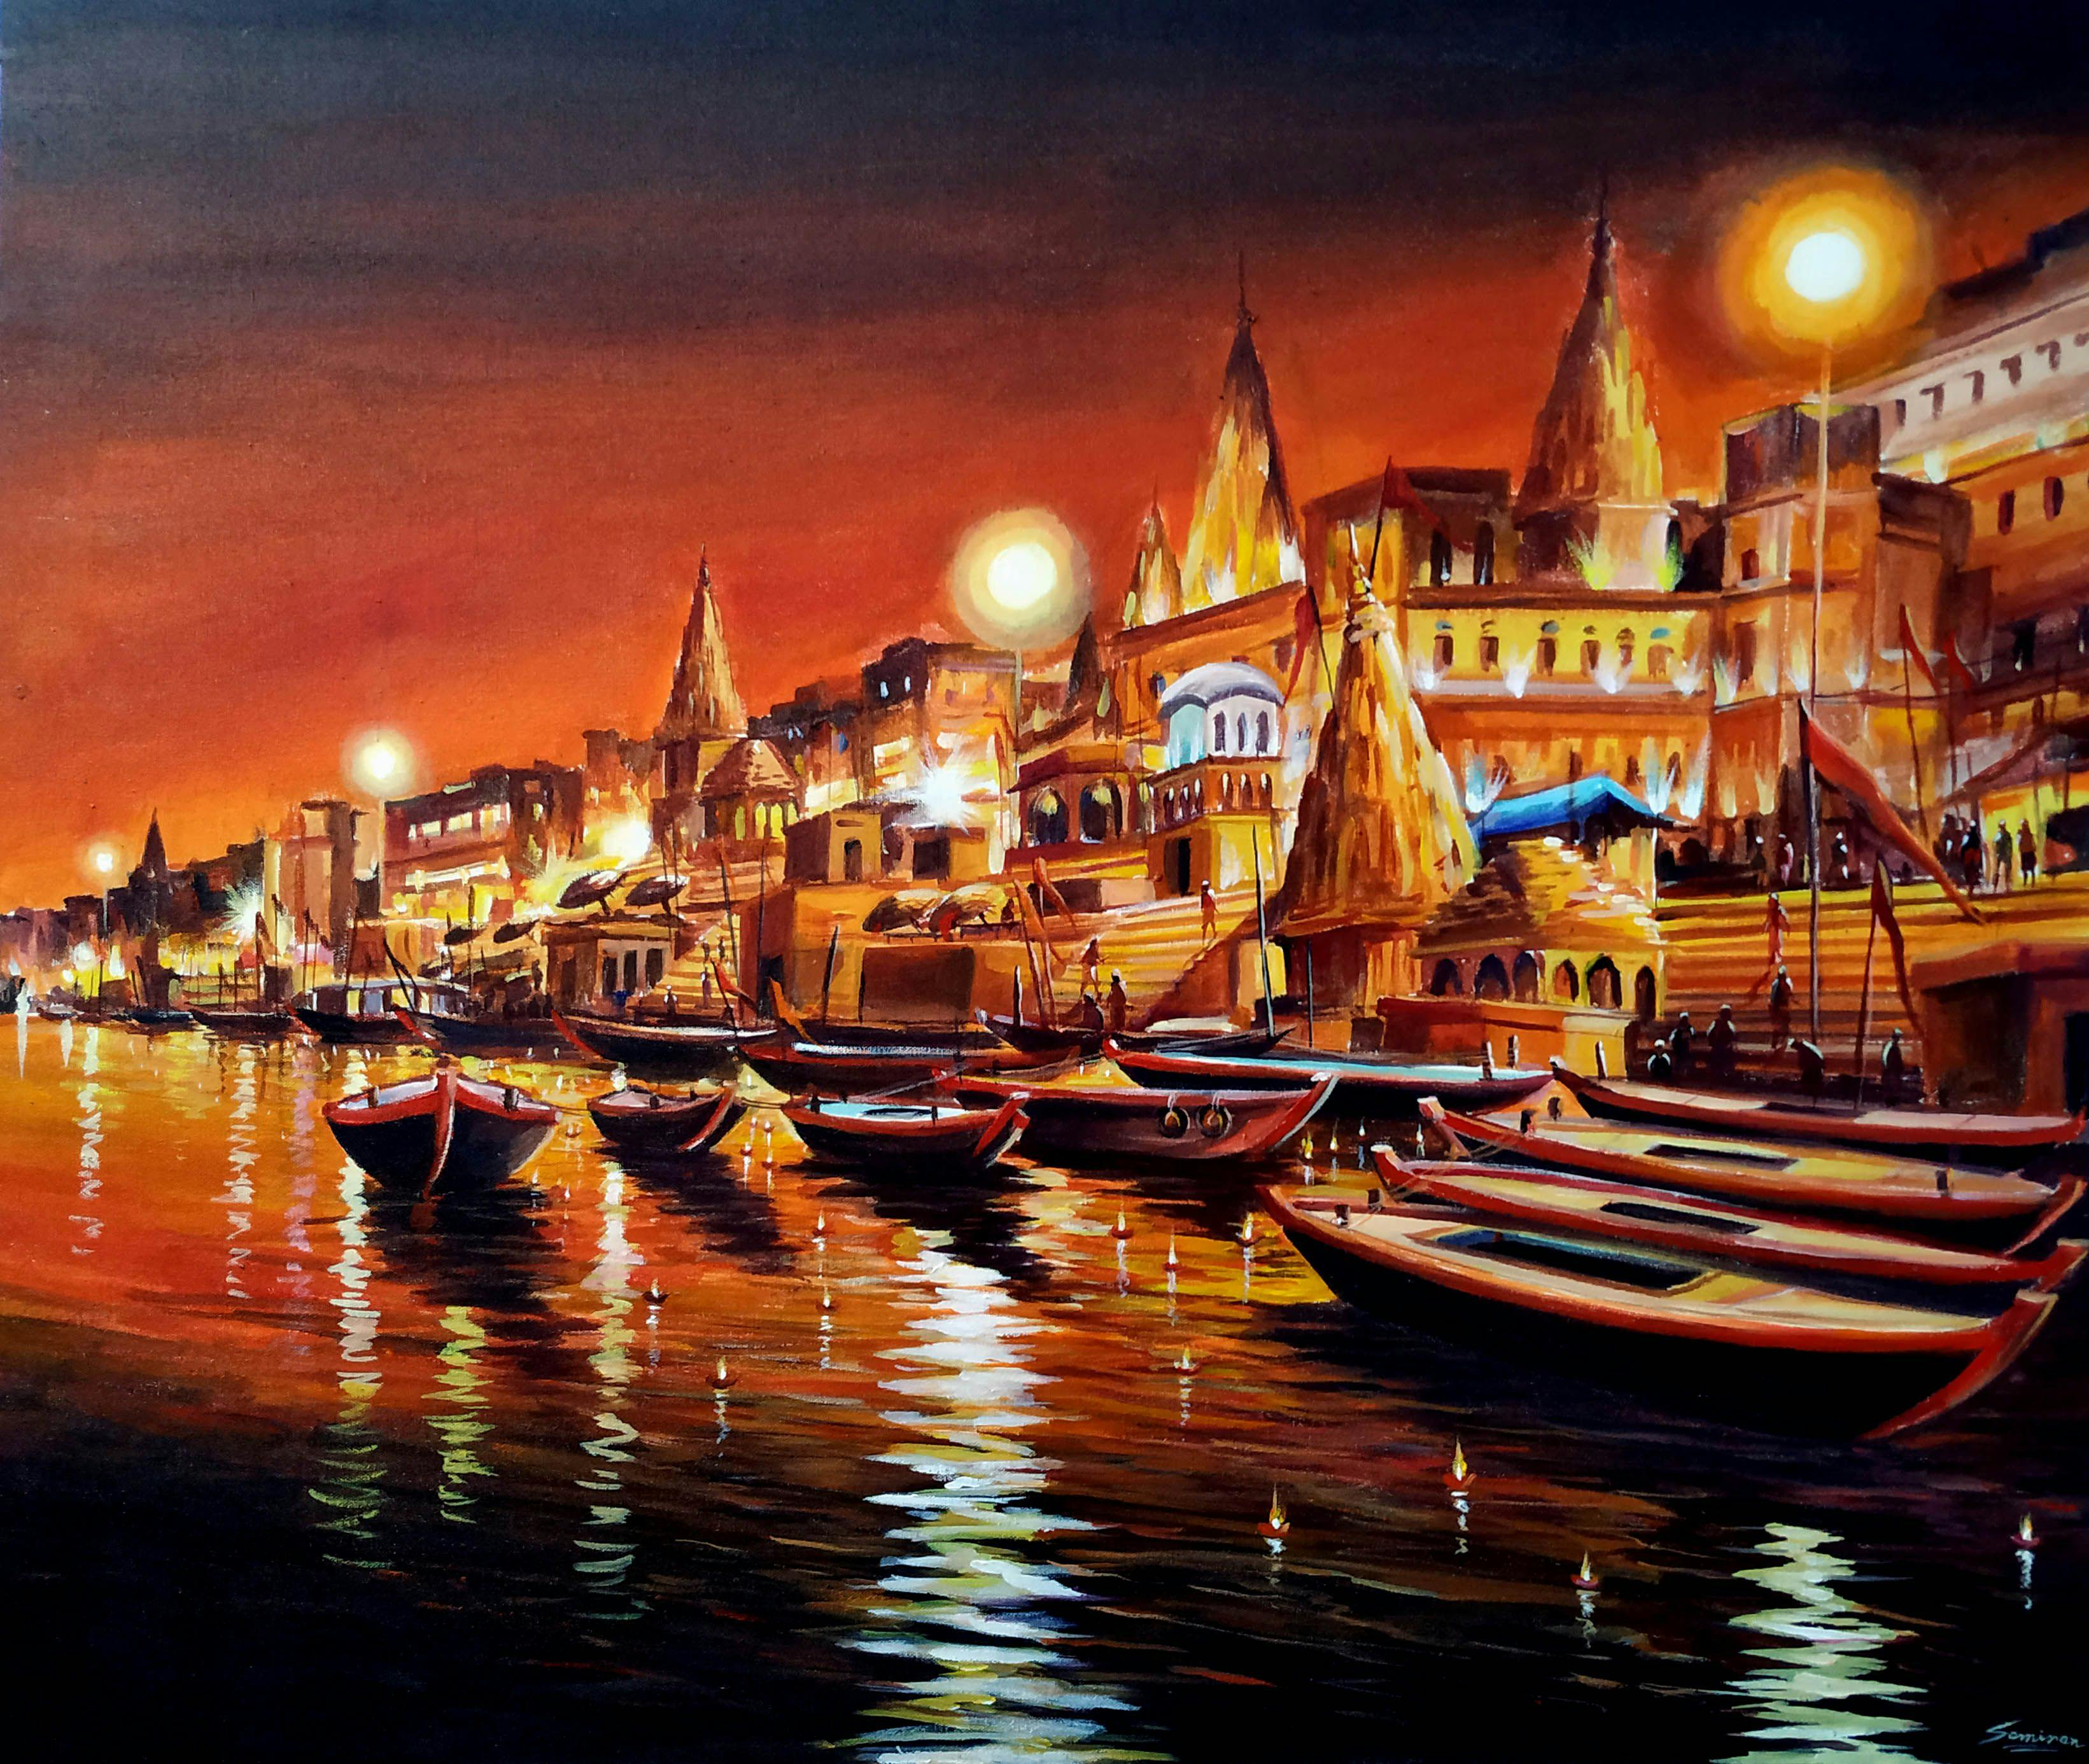 "Enchanting Varanasi: An Unforgettable Journey Tailored Especially for Parents"